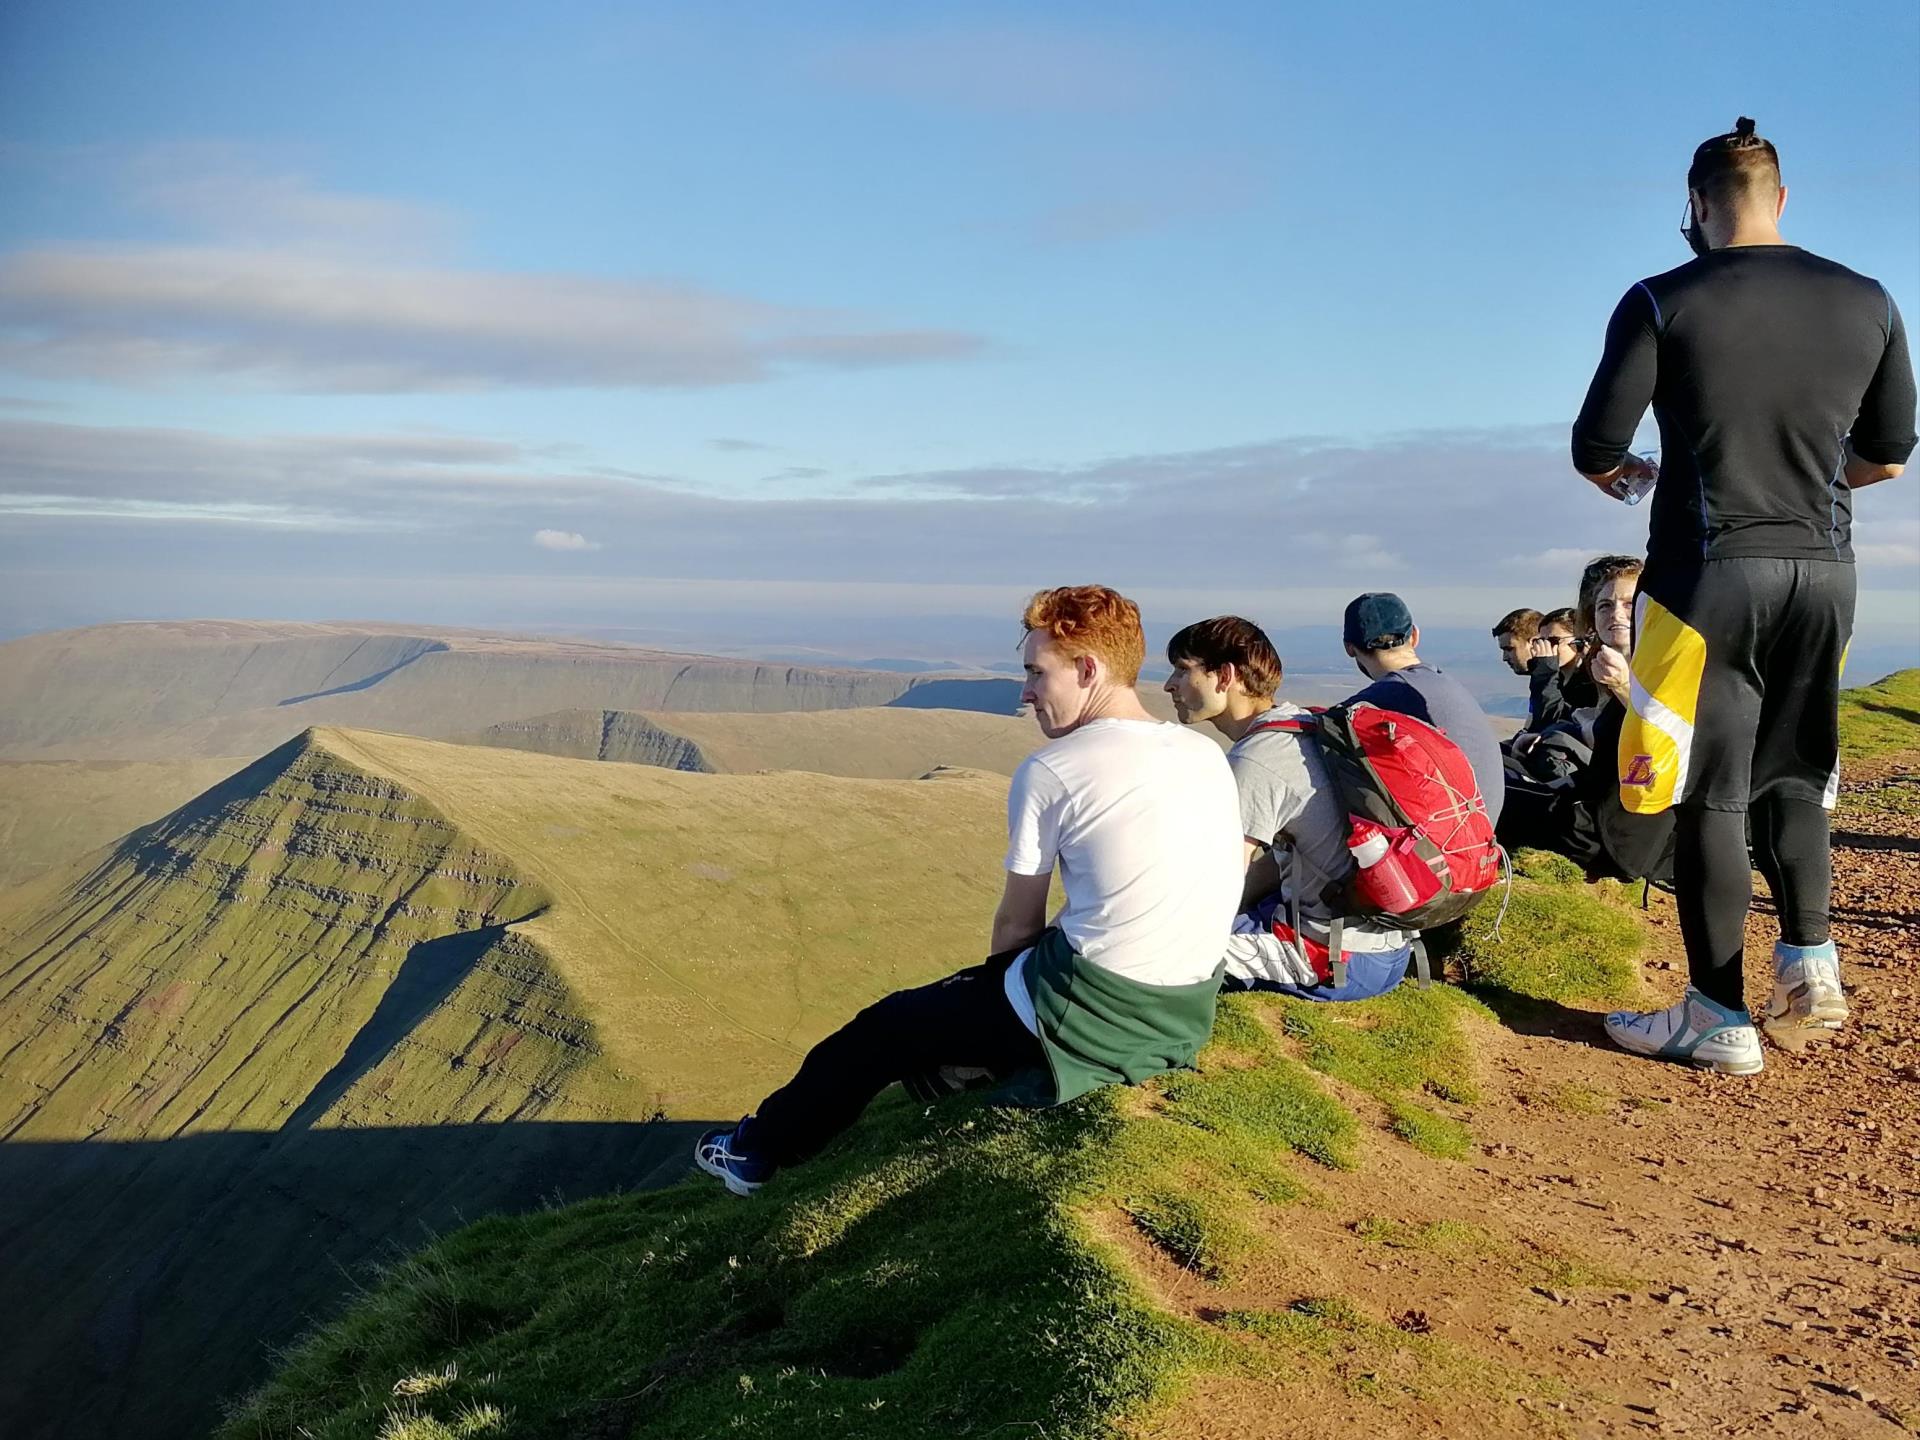 Team Building in the Brecon Beacons National Park